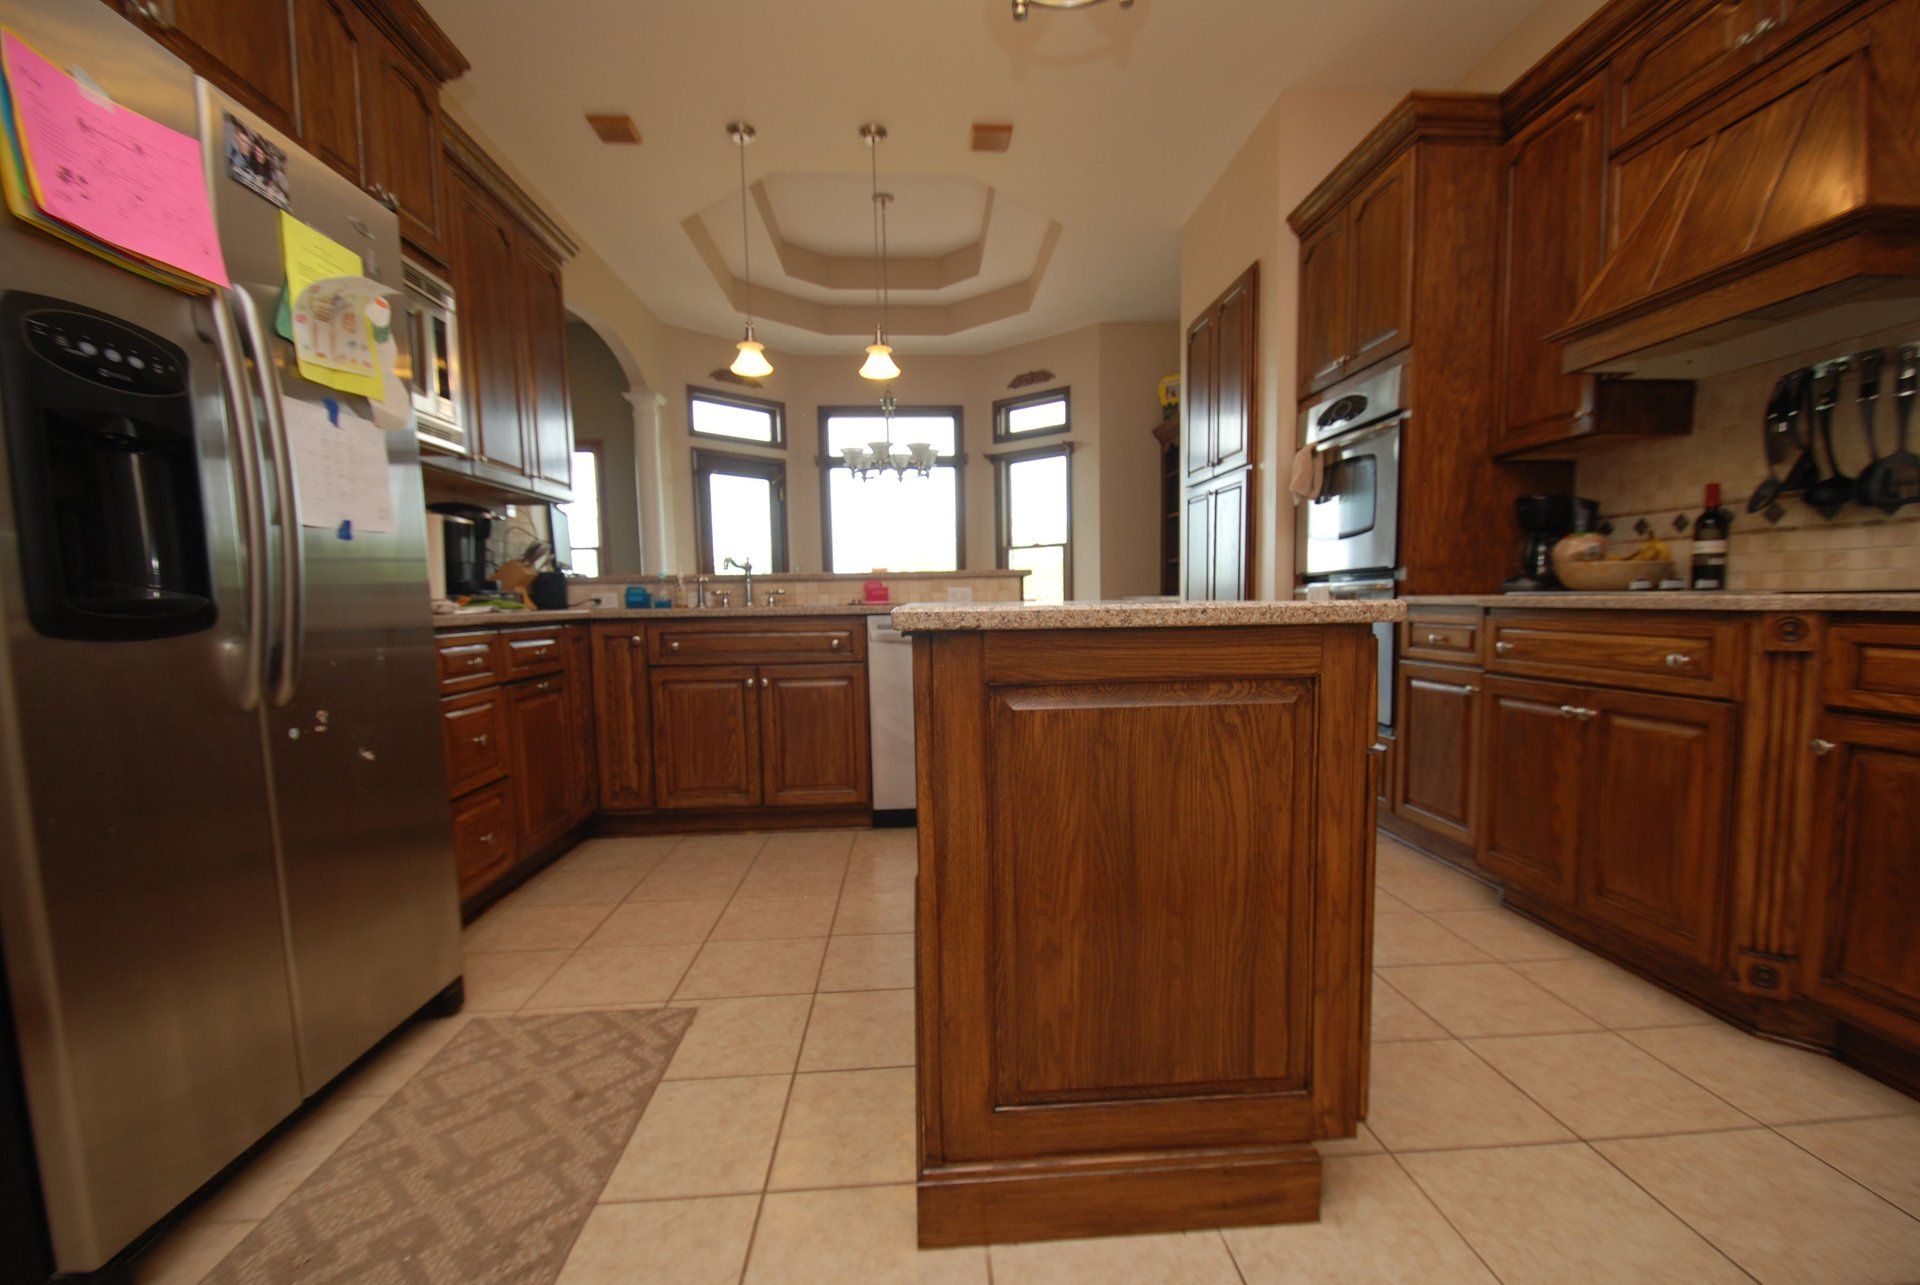 Castaic walnut stained cabinets